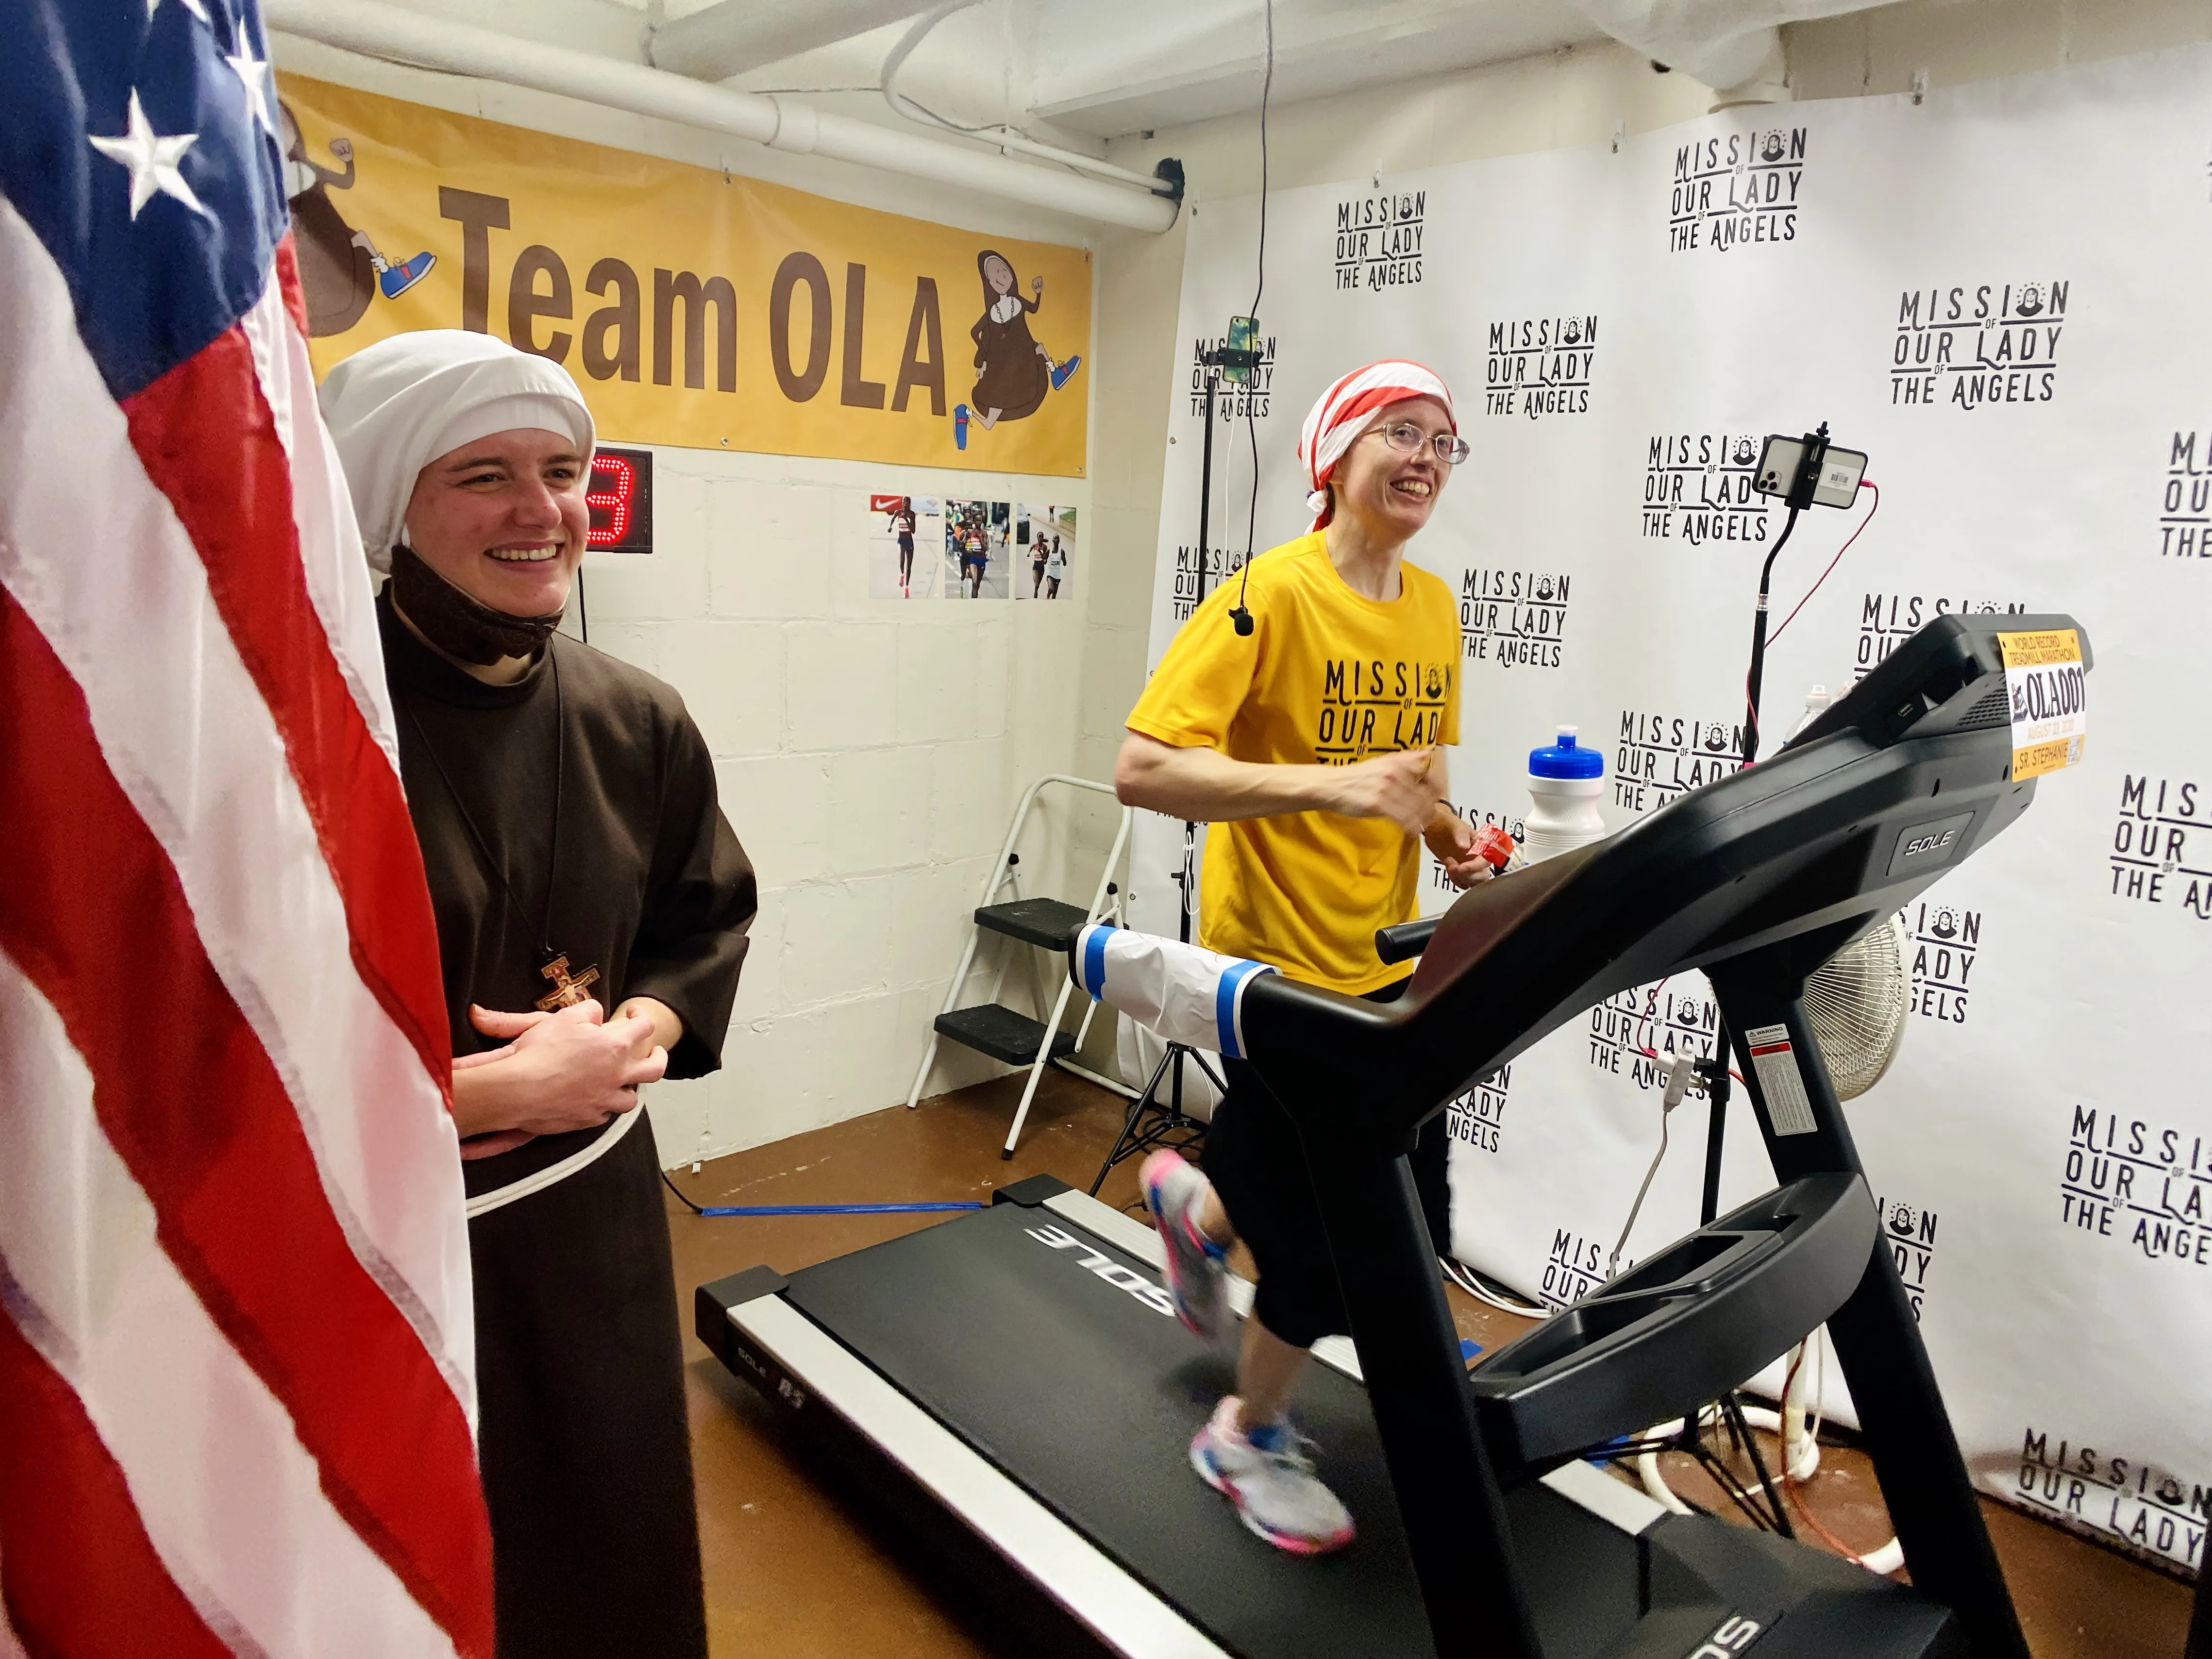 Sister Stephanie Baliga of the Franciscans of the Eucharist of Chicago runs a marathon on a treadmill in 2020.?w=200&h=150